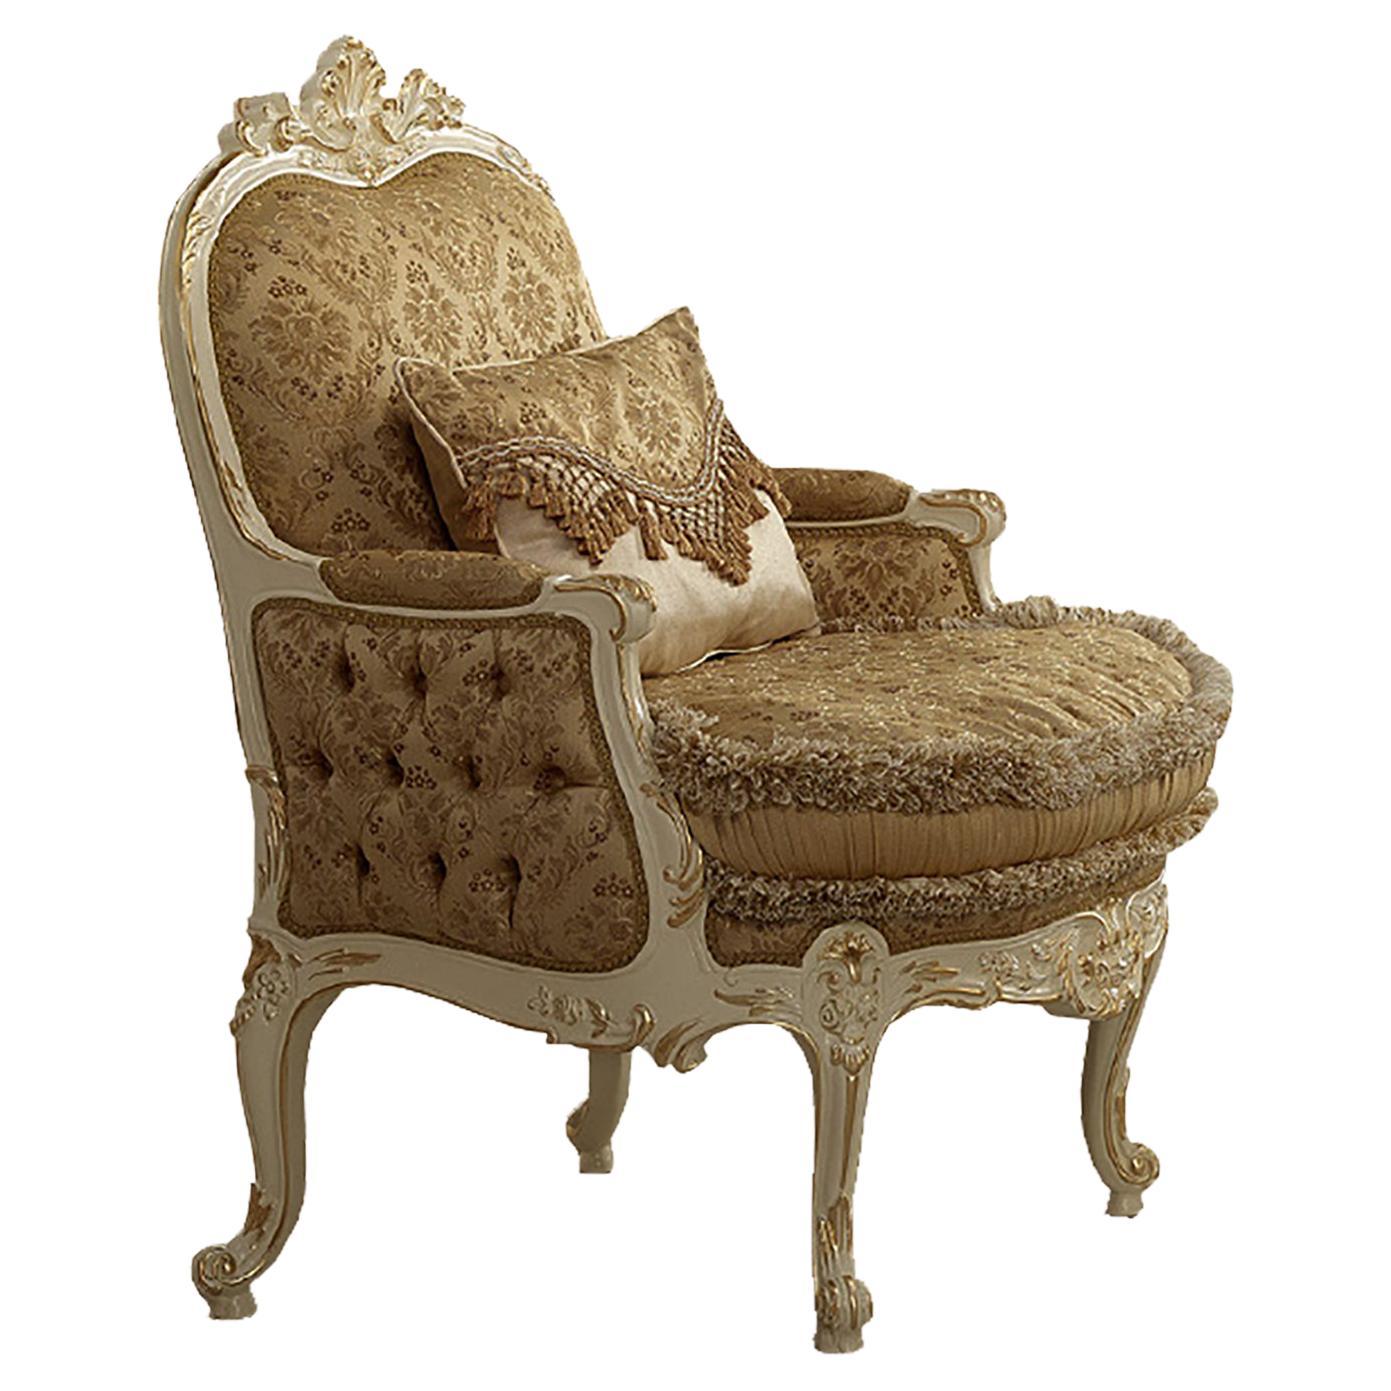 Victorian Armchair in Cream Beige Fabric with Ivory Finishing by Modenese